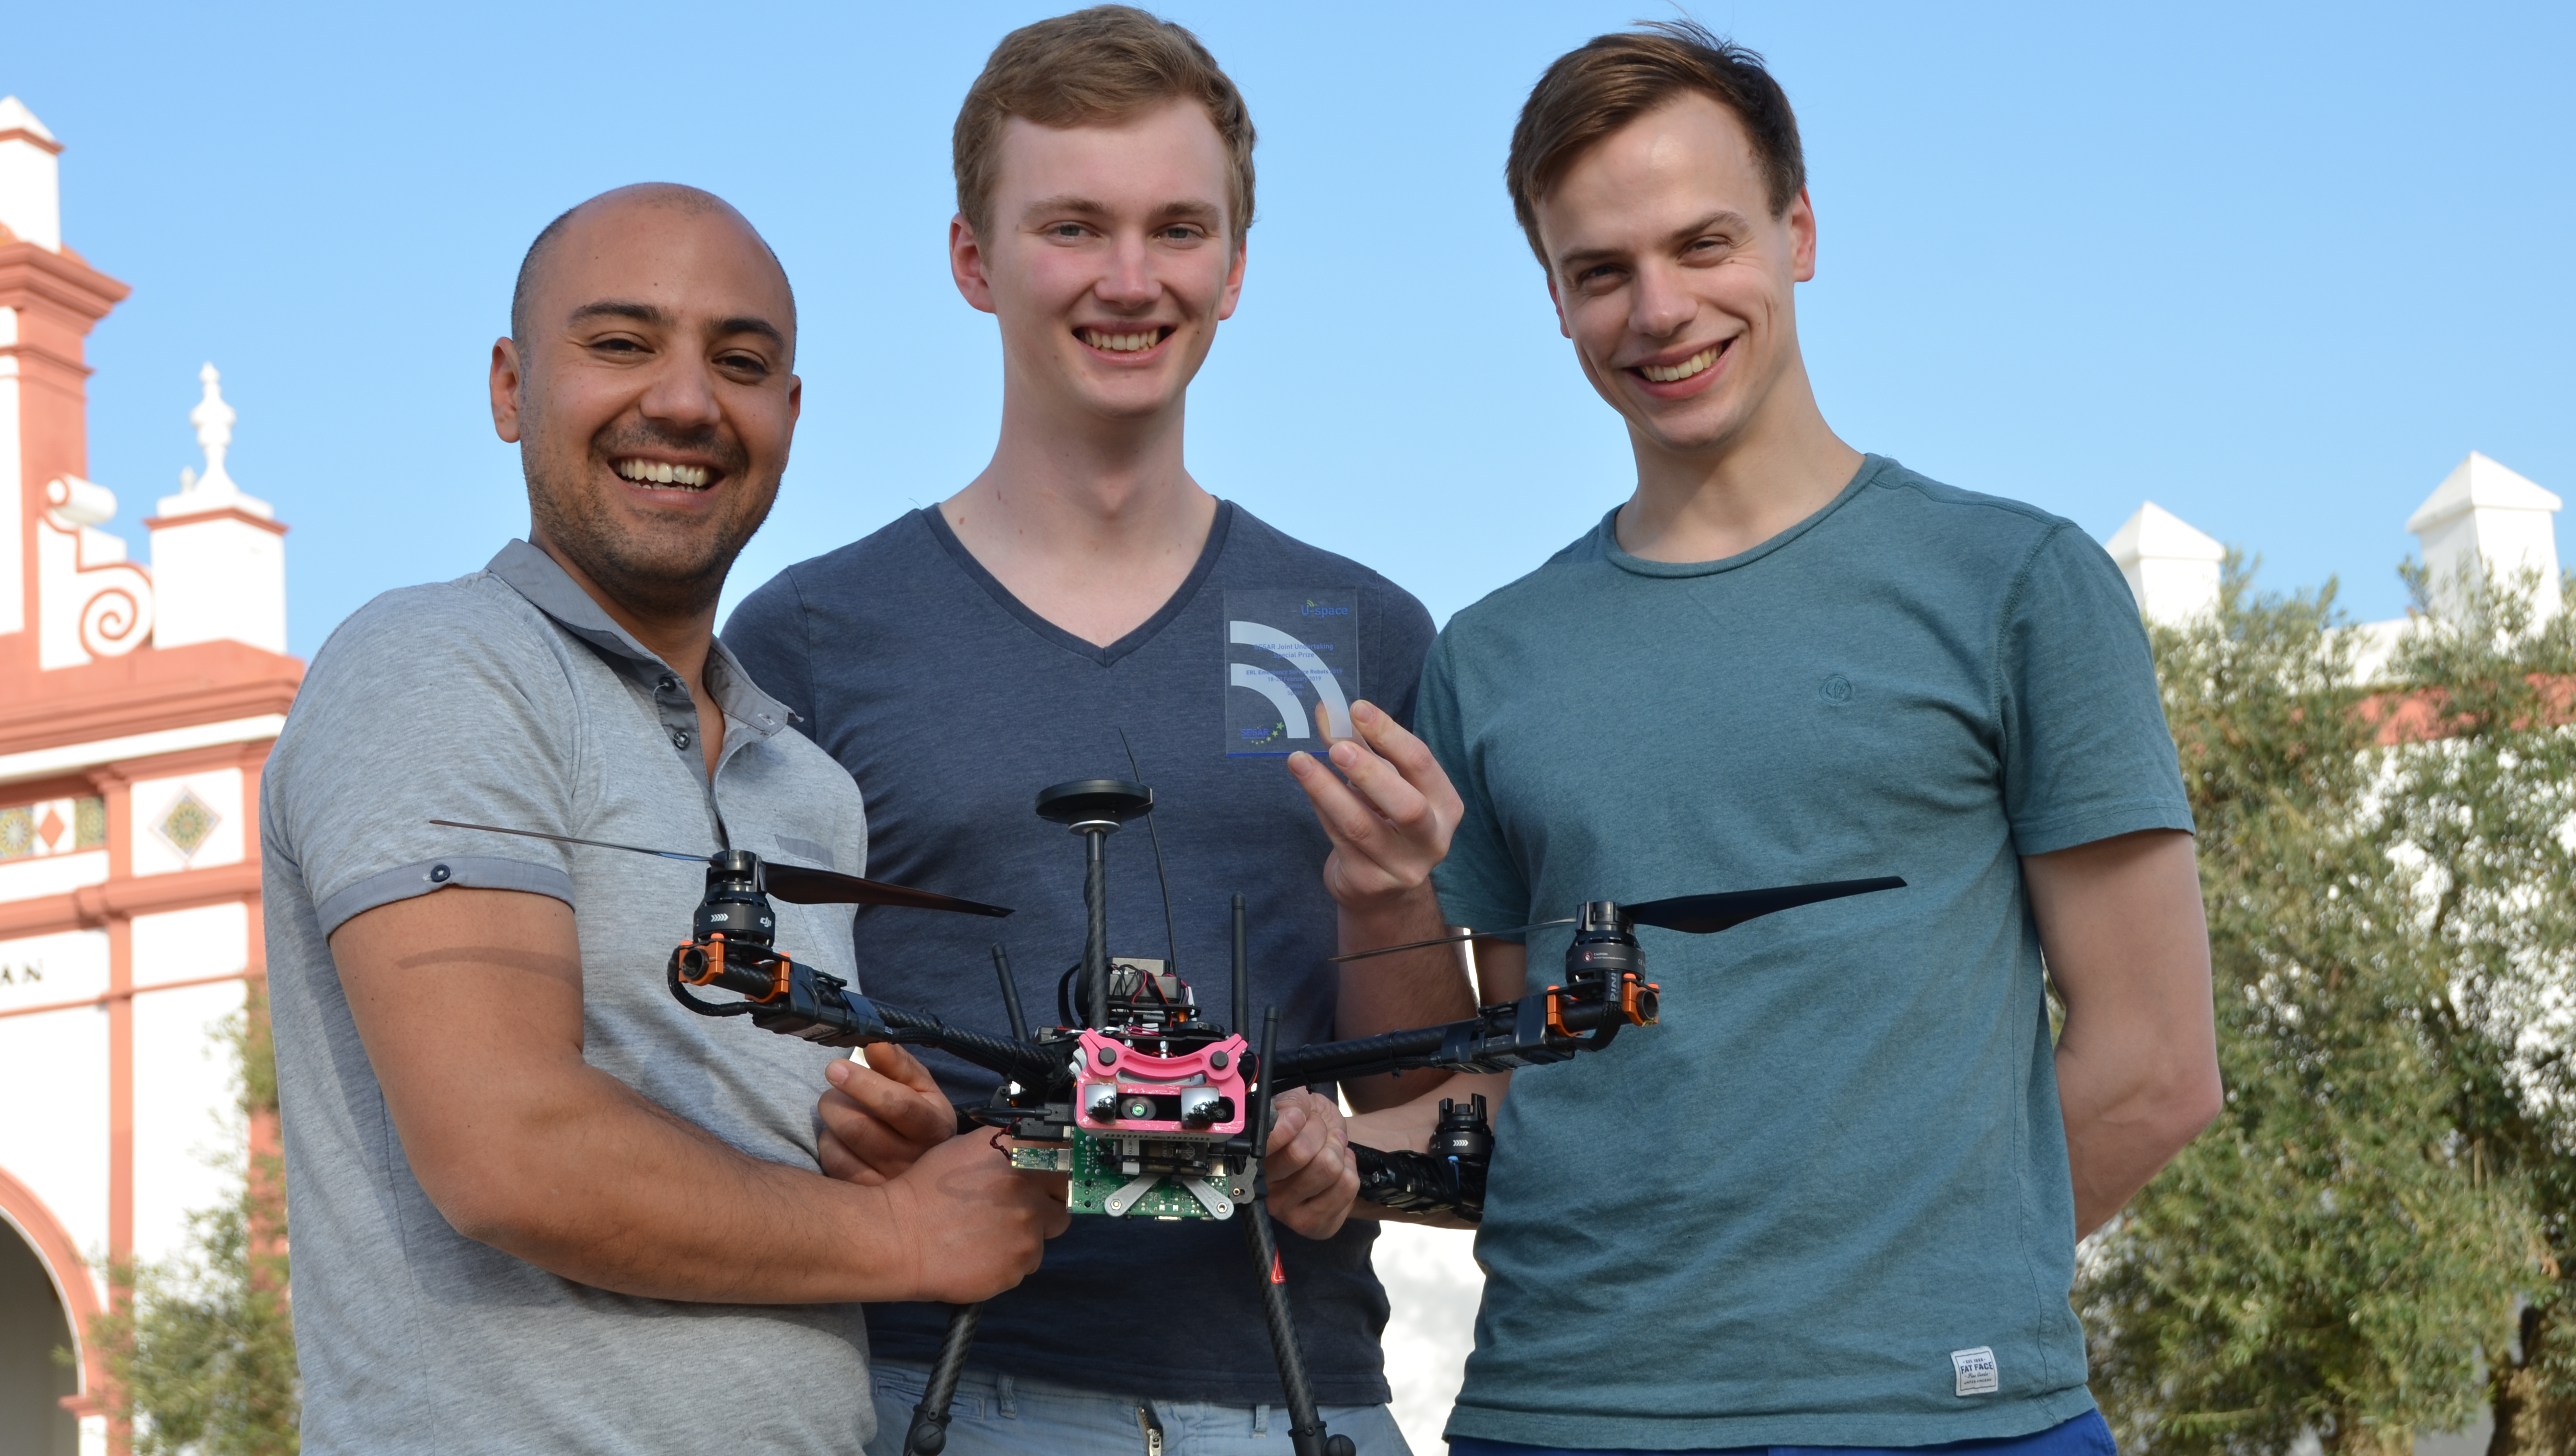 Team Bath Drones, was awarded the SESAR special prize in recognition of the team's technical innovations to ensure the safe access to airspace for drones or aerial robots.  